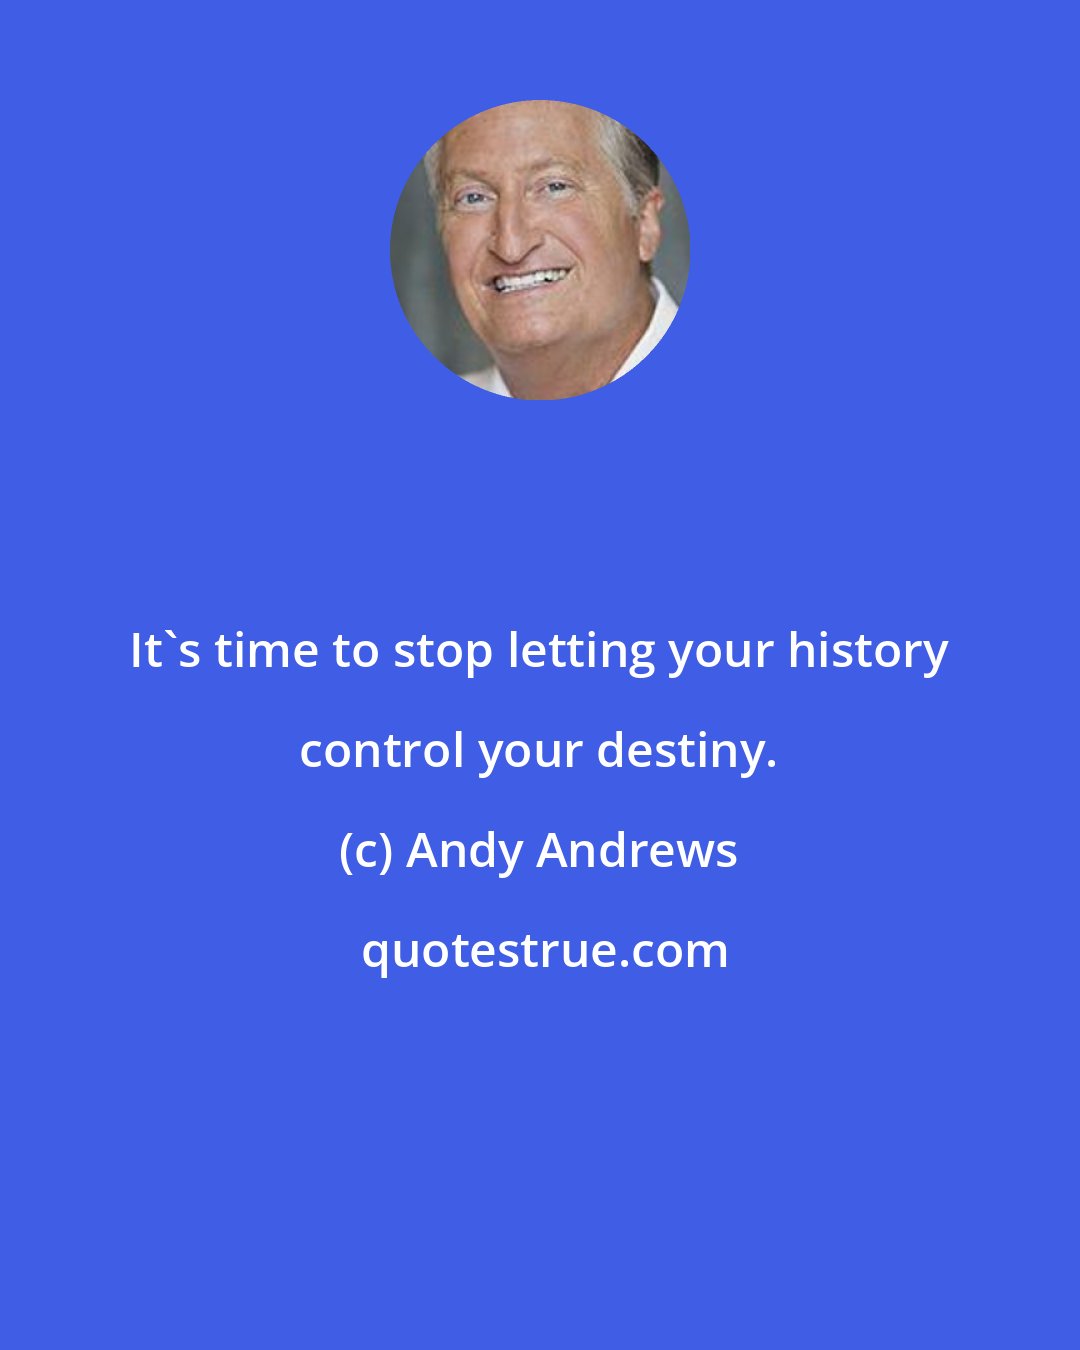 Andy Andrews: It's time to stop letting your history control your destiny.